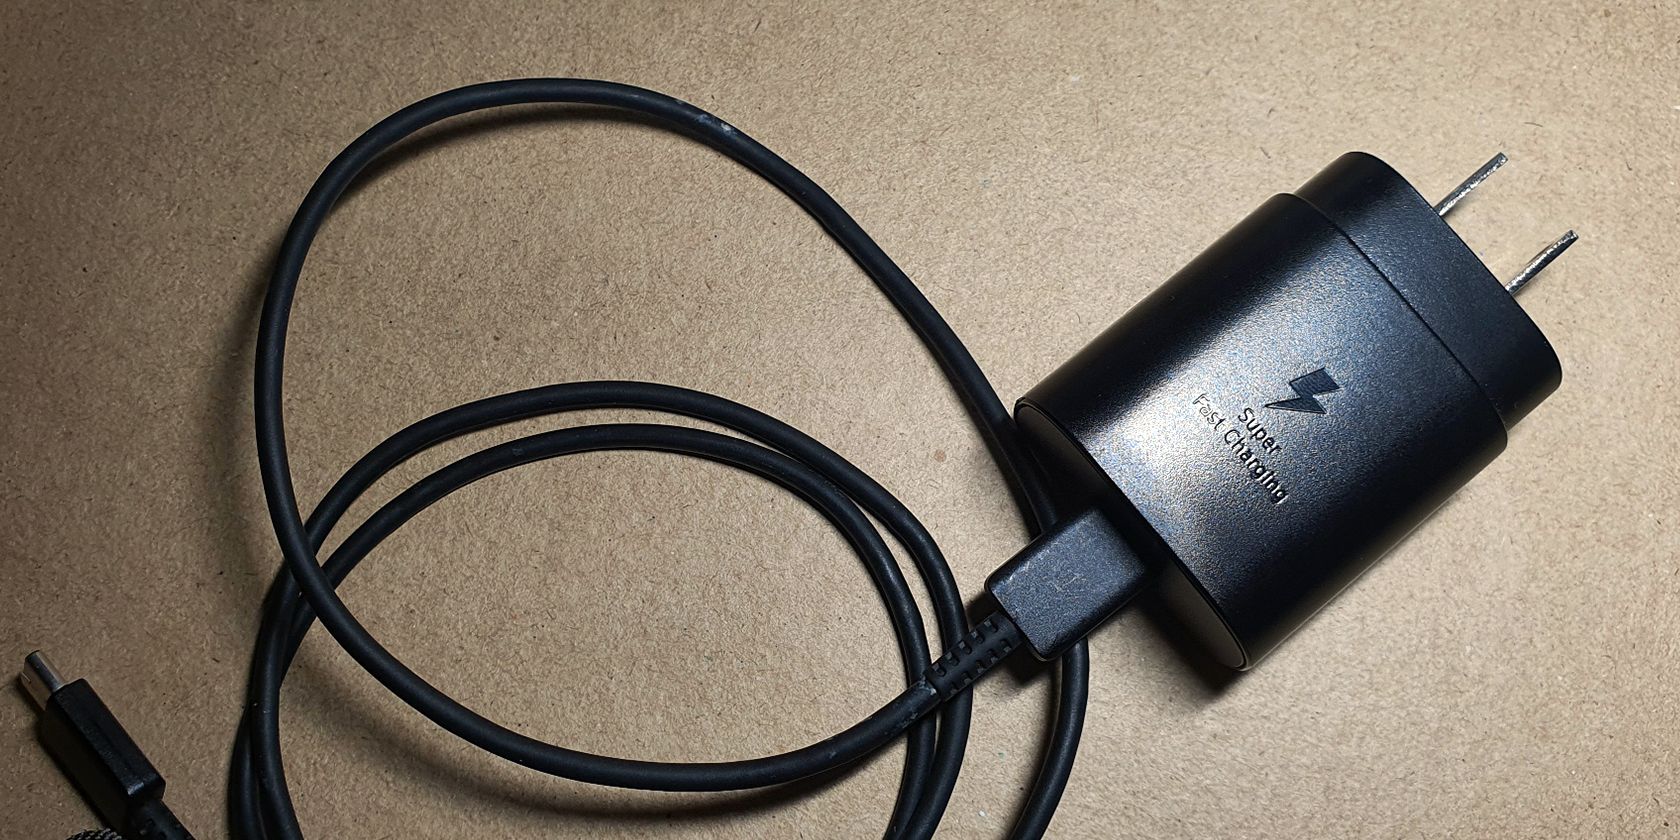 Samsung super fast charging power adapter